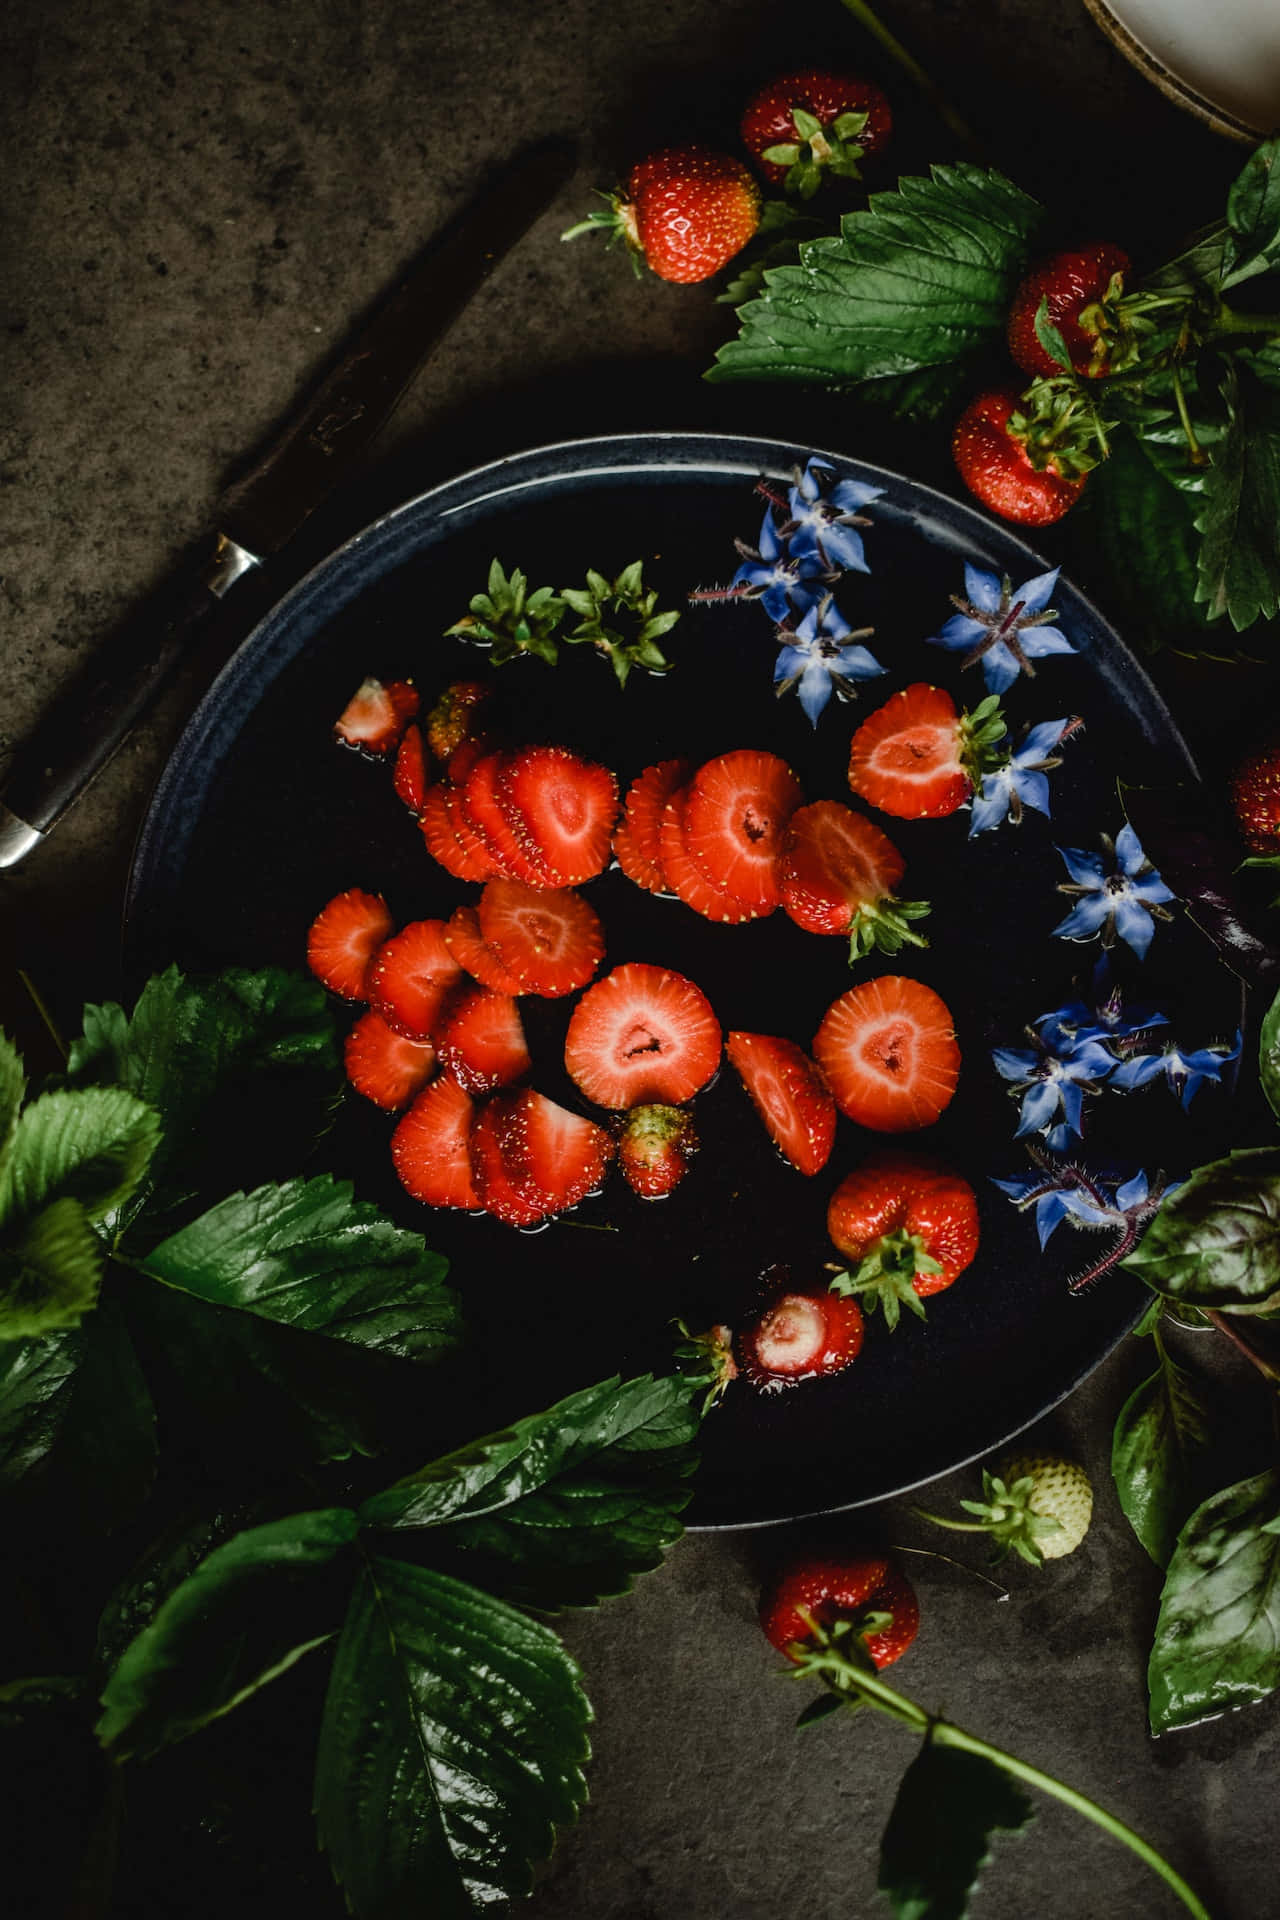 Phone Wallpaper Featuring A Photo Of Sliced Strawberries And Blue Borage Flowers On A Black Plate